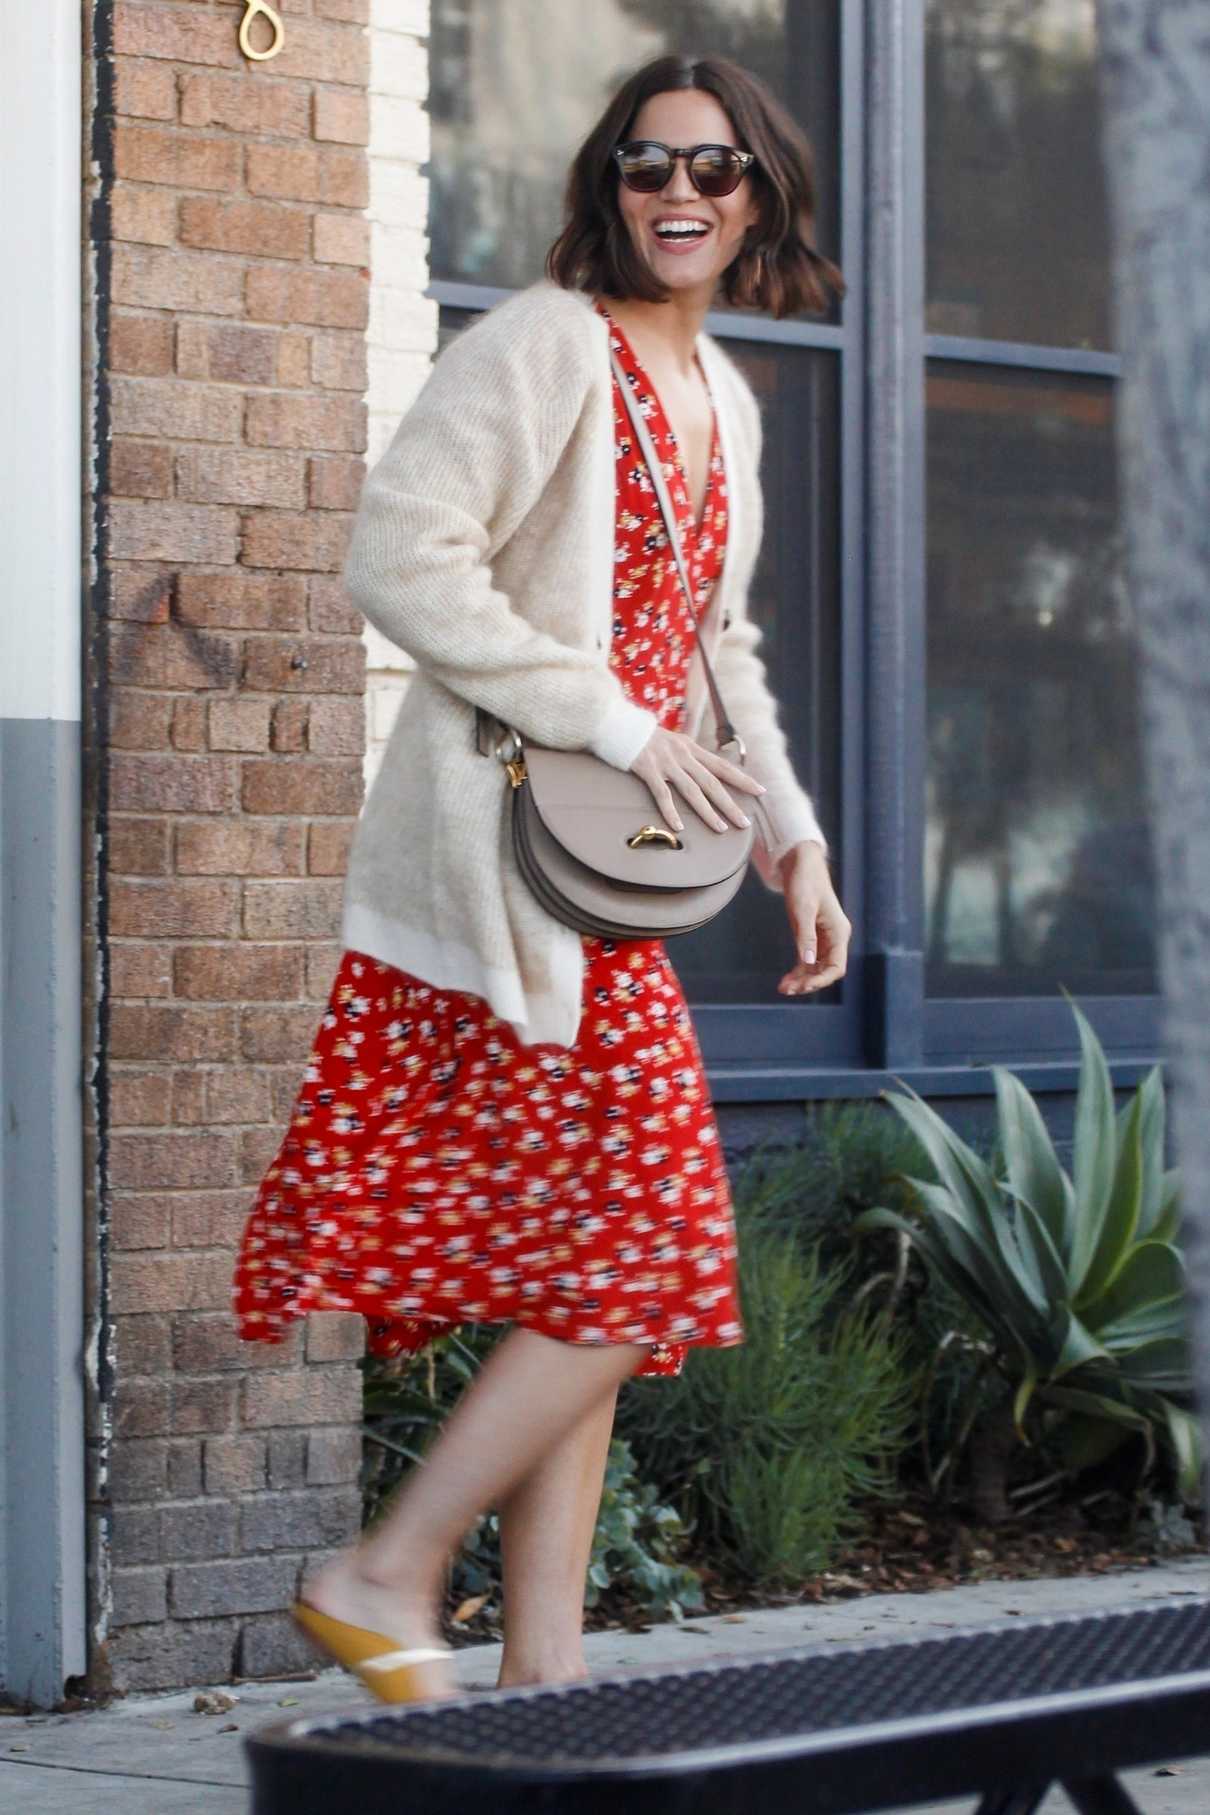 Mandy Moore in a Red Floral Dress